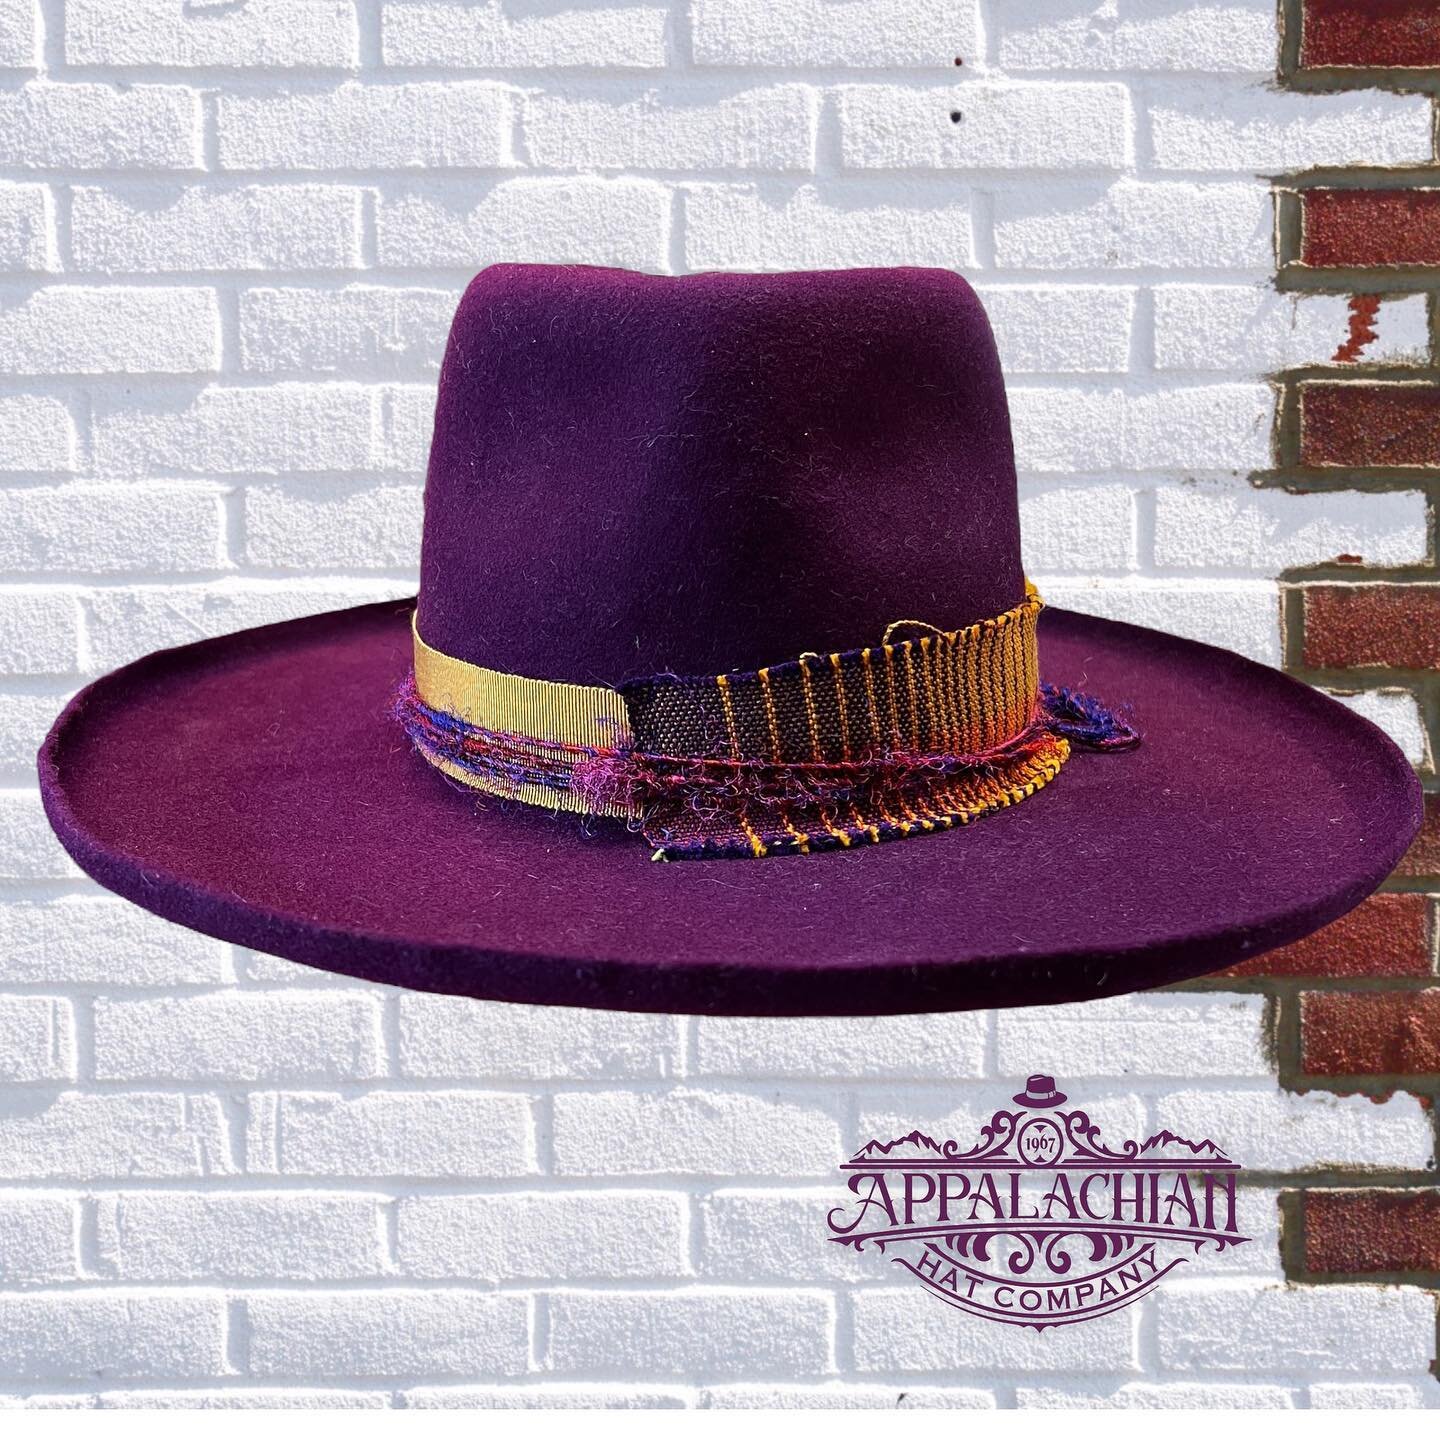 Purple passion fur felt fedor w pencil curled brim and hand loom woven thrum, woven silk dyed yarn #fedora #hat #customhat #hatmaker #appalachianhatco #purplehat #zootsuit #classic #style #blackmountain #asheville #wnc